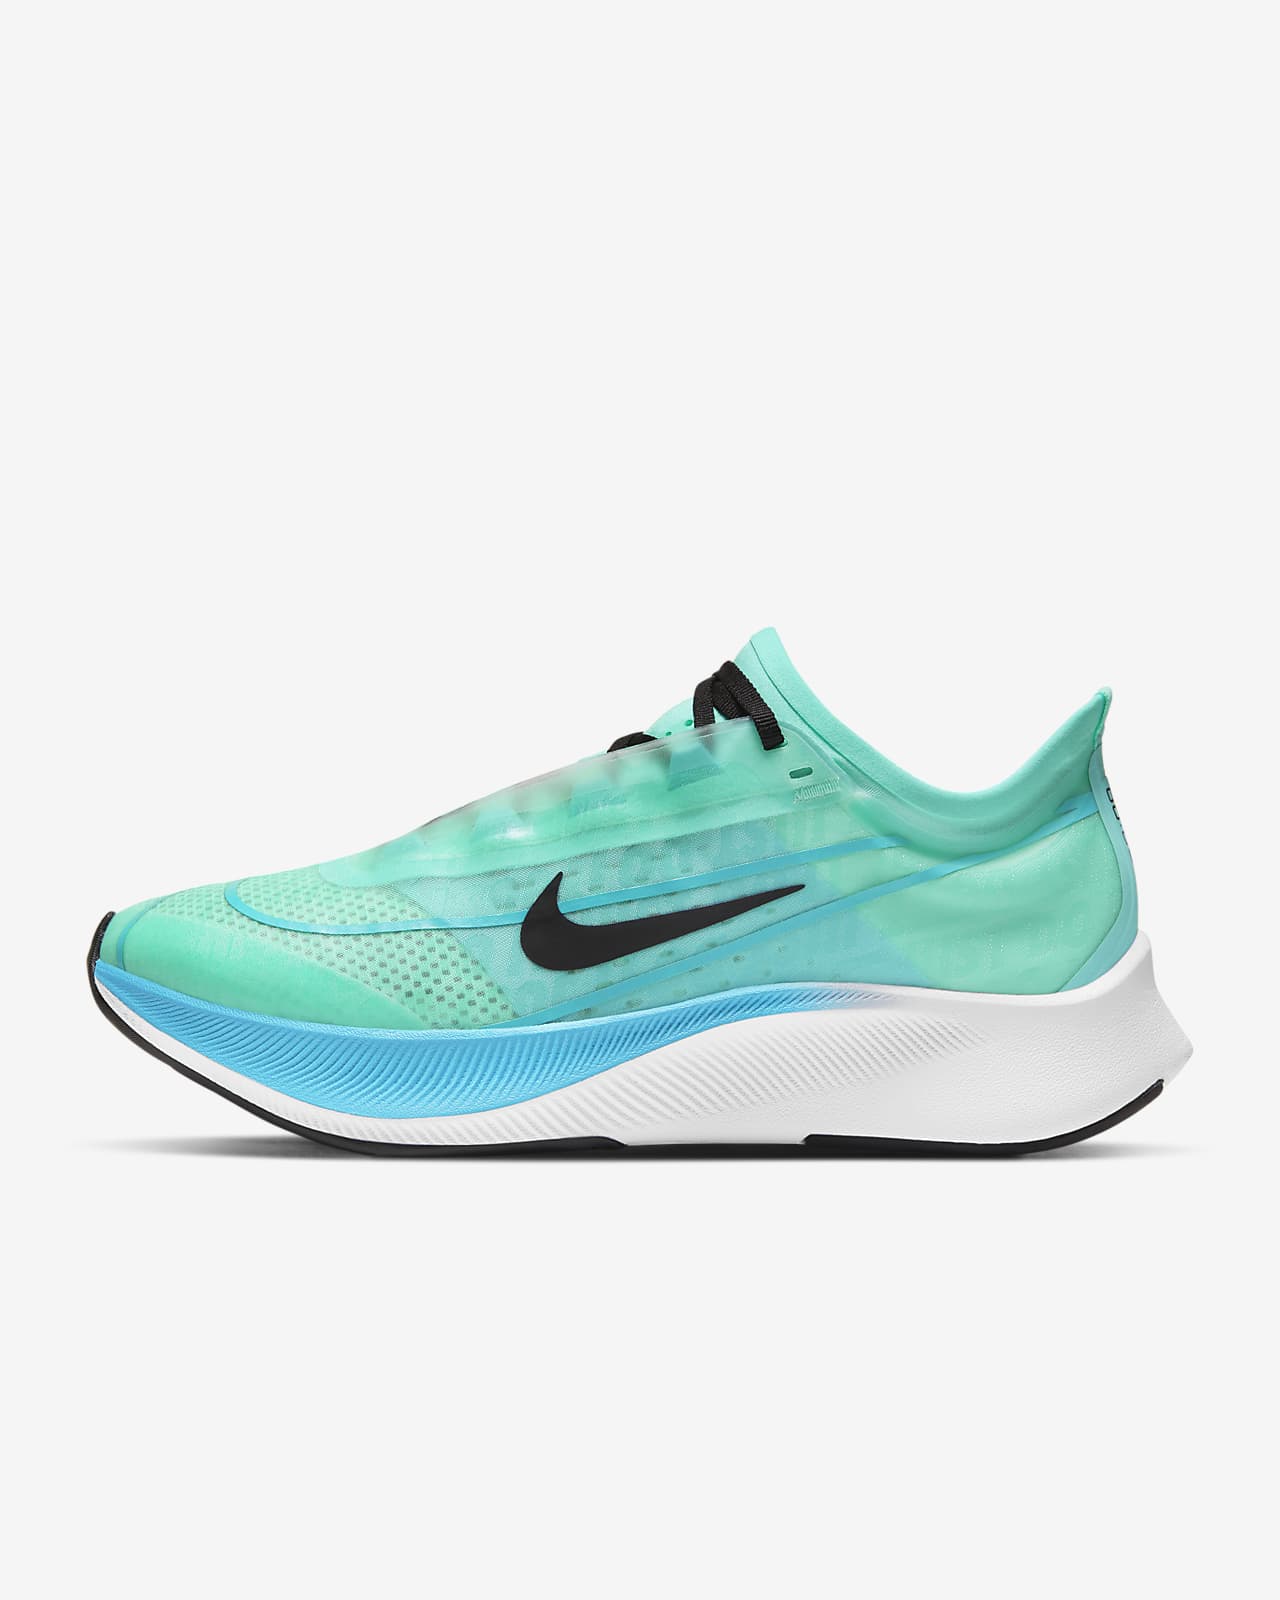 nike women's shoes blue and green